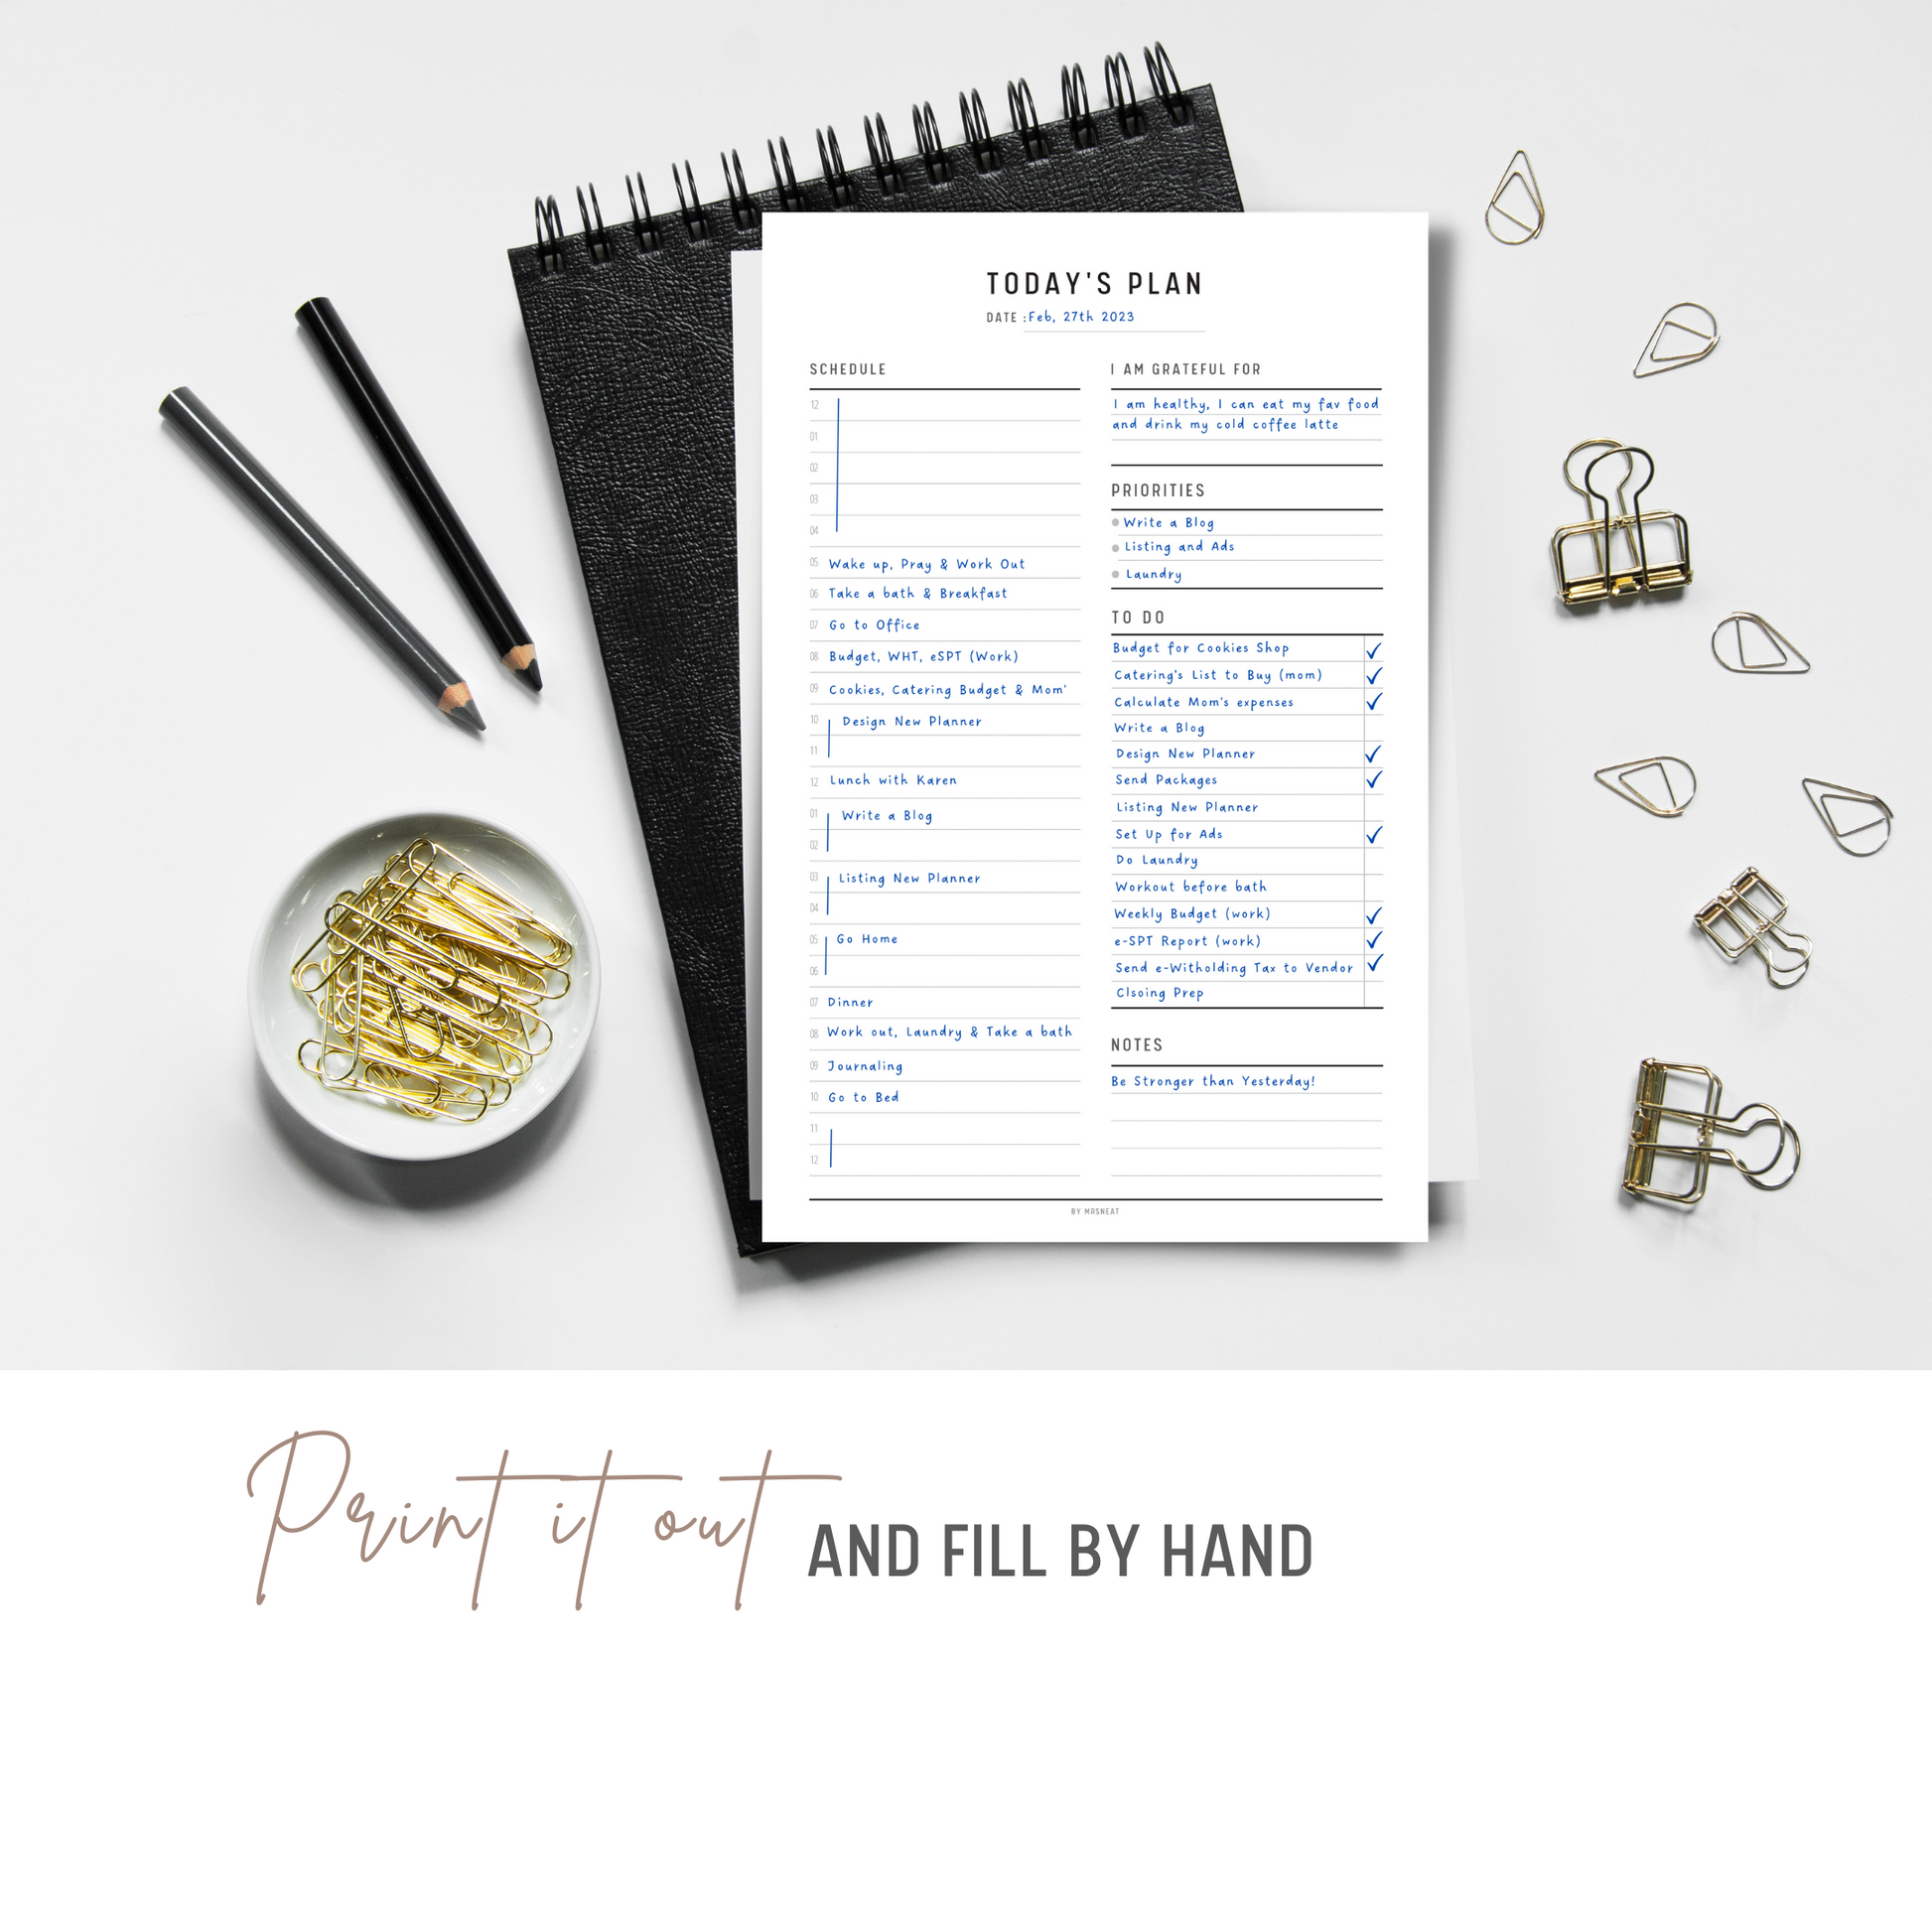 24 Hour Daily Planner Printable – mrsneat